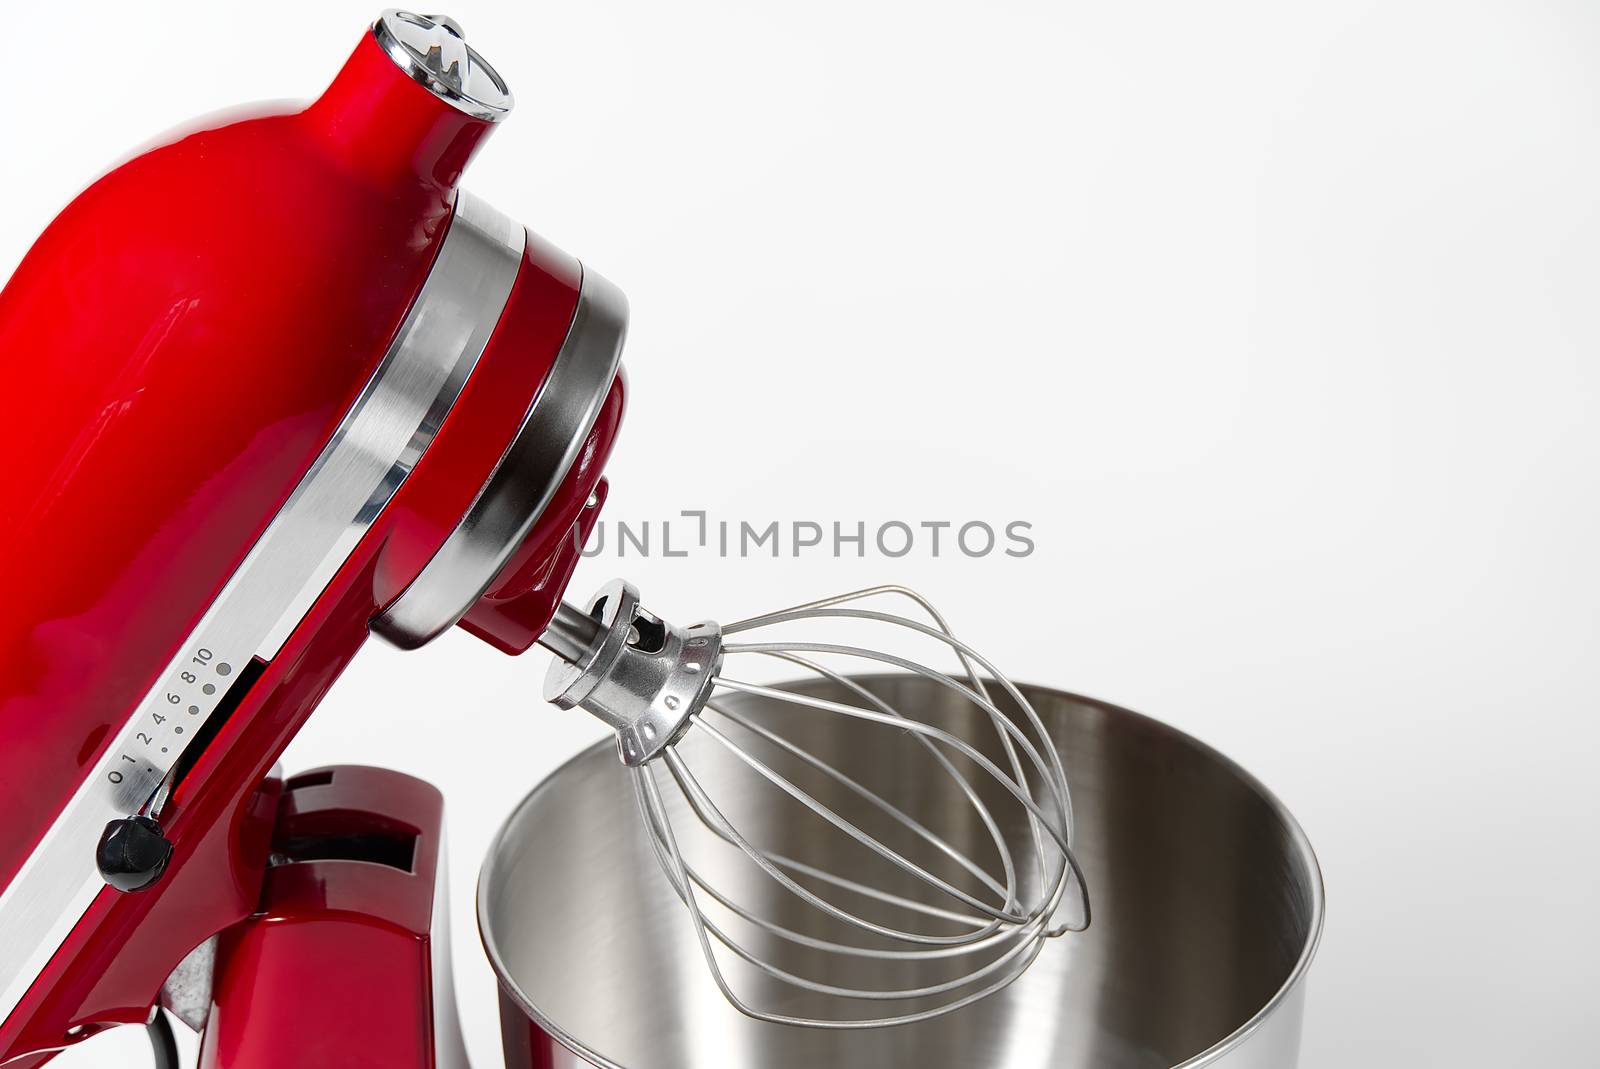 Stylish Red Kitchen Mixer With Clipping Path Isolated On White Background. Professional steel electric mixer with Metal Whisk.